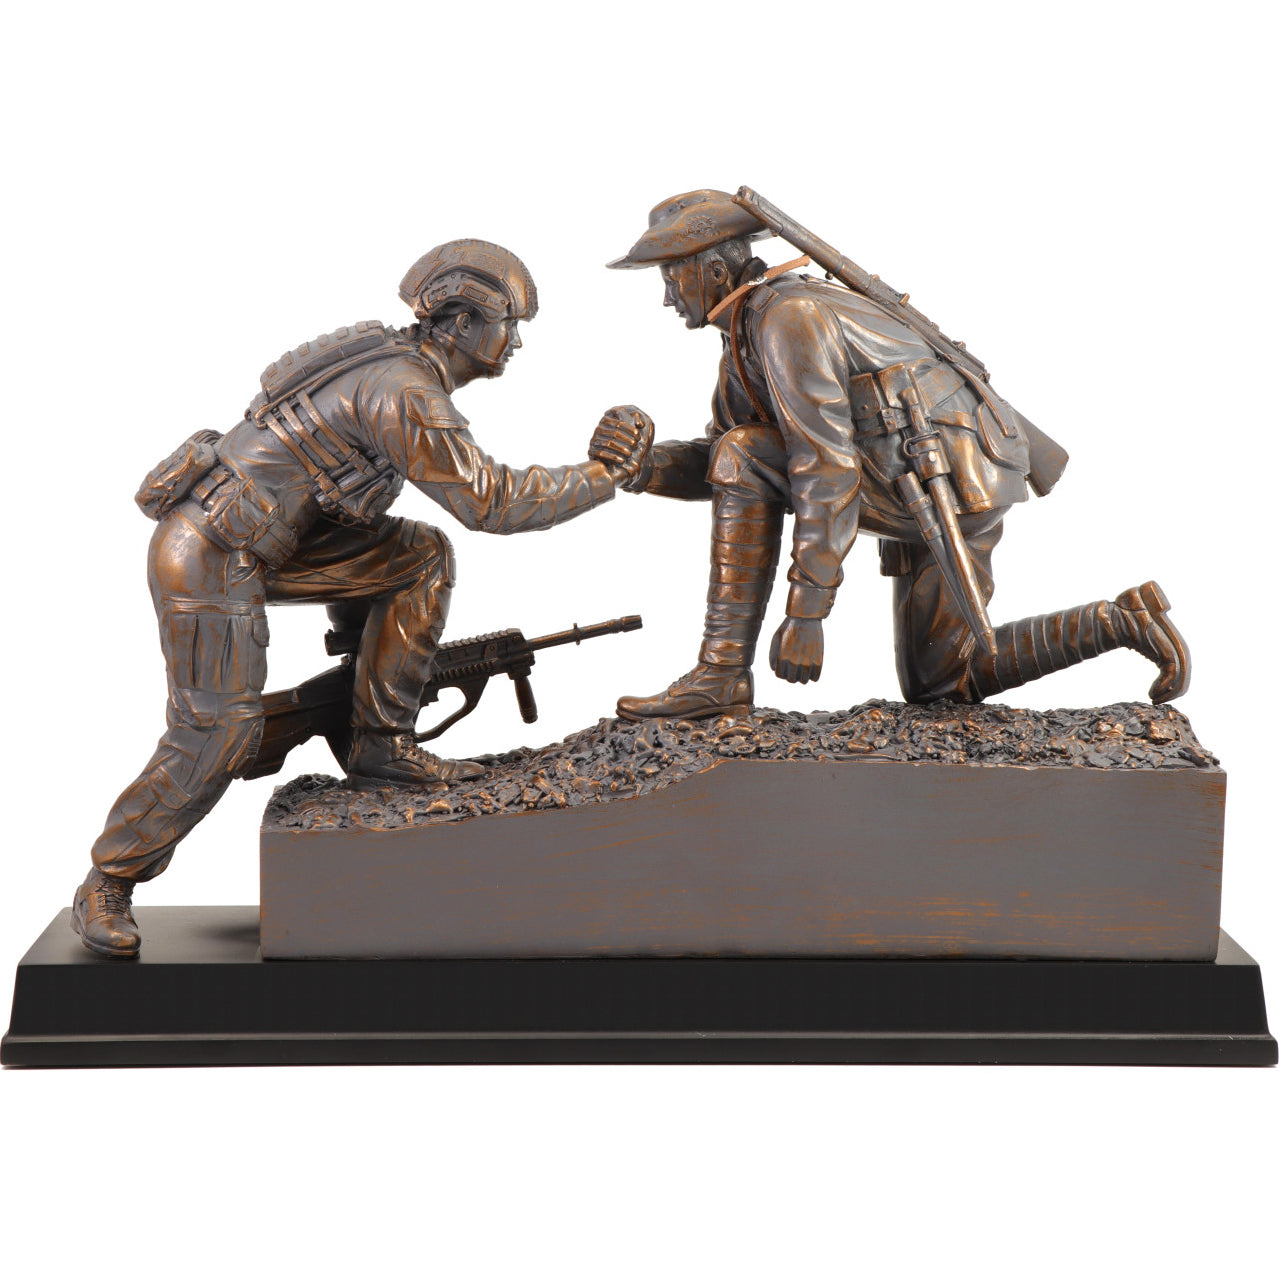 The "Spirit of Mateship Limited Edition Figurine" is a poignant and timeless tribute that captures the unwavering bond and camaraderie of Australian soldiers across generations. This exquisite cold cast bronze figurine, perched atop a timber base, depicts a powerful scene—a WW1 digger extending a helping hand to a modern Australian soldier, navigating a treacherous and muddy battlefield. www.defenceqstore.com.au